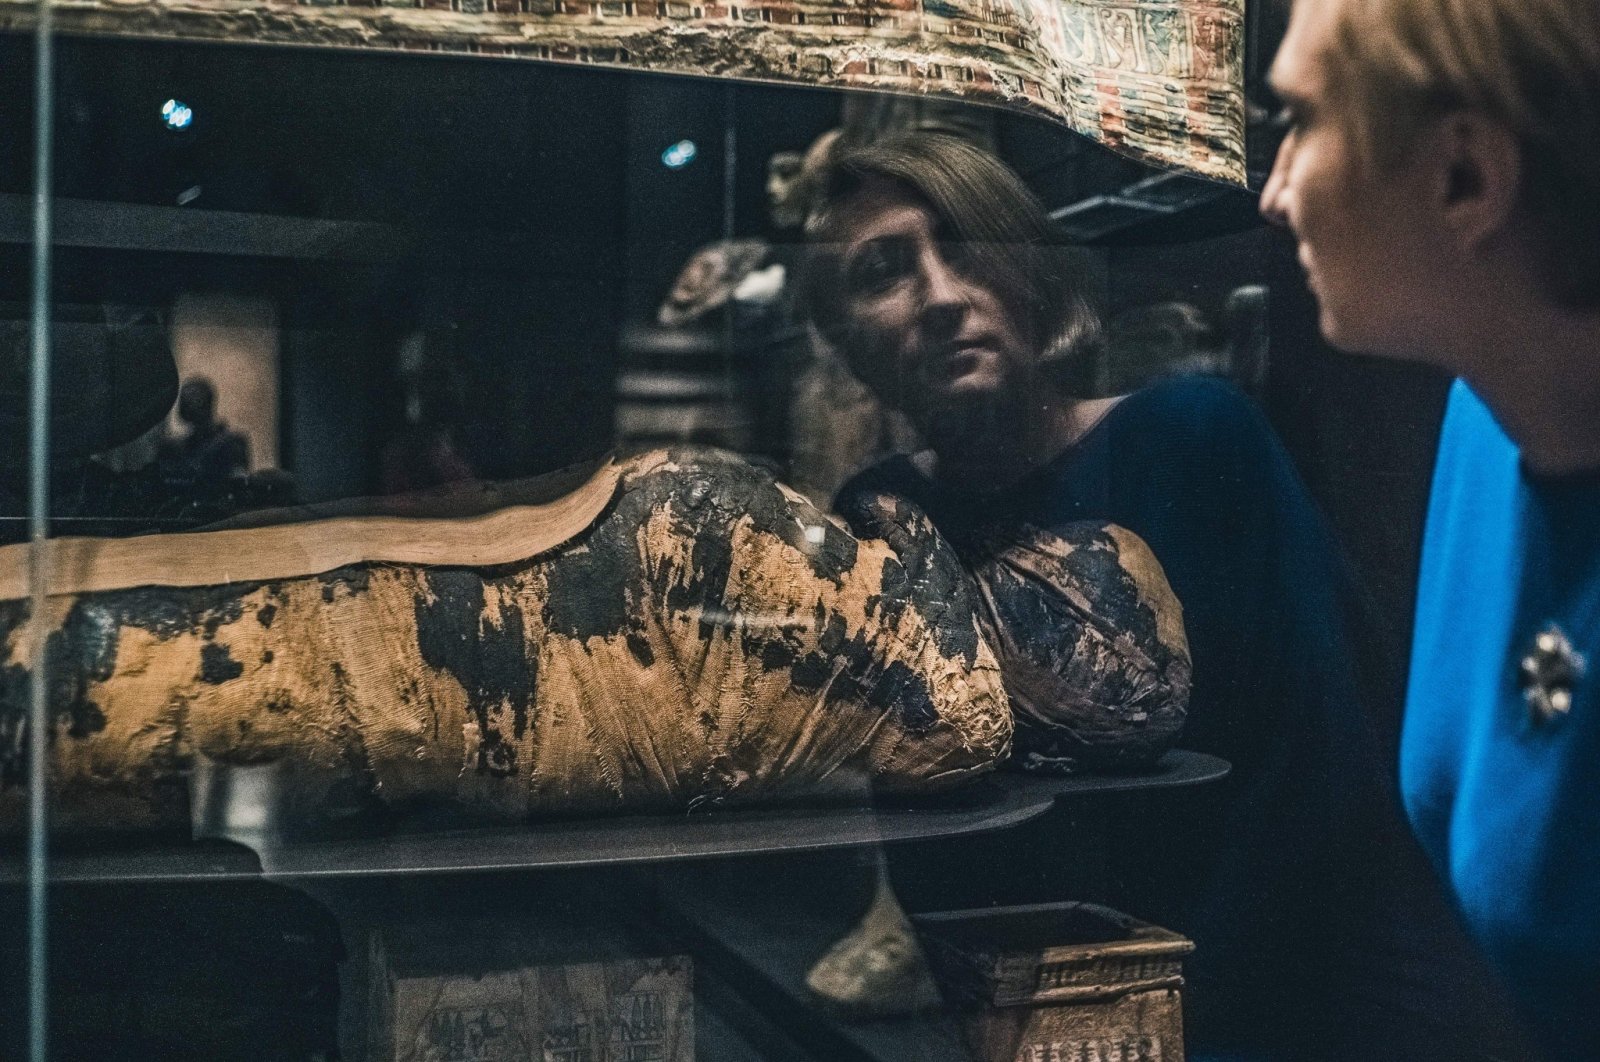 The mummified woman at The National Museum in Warsaw. (Photo via Warsaw Mummy Project)